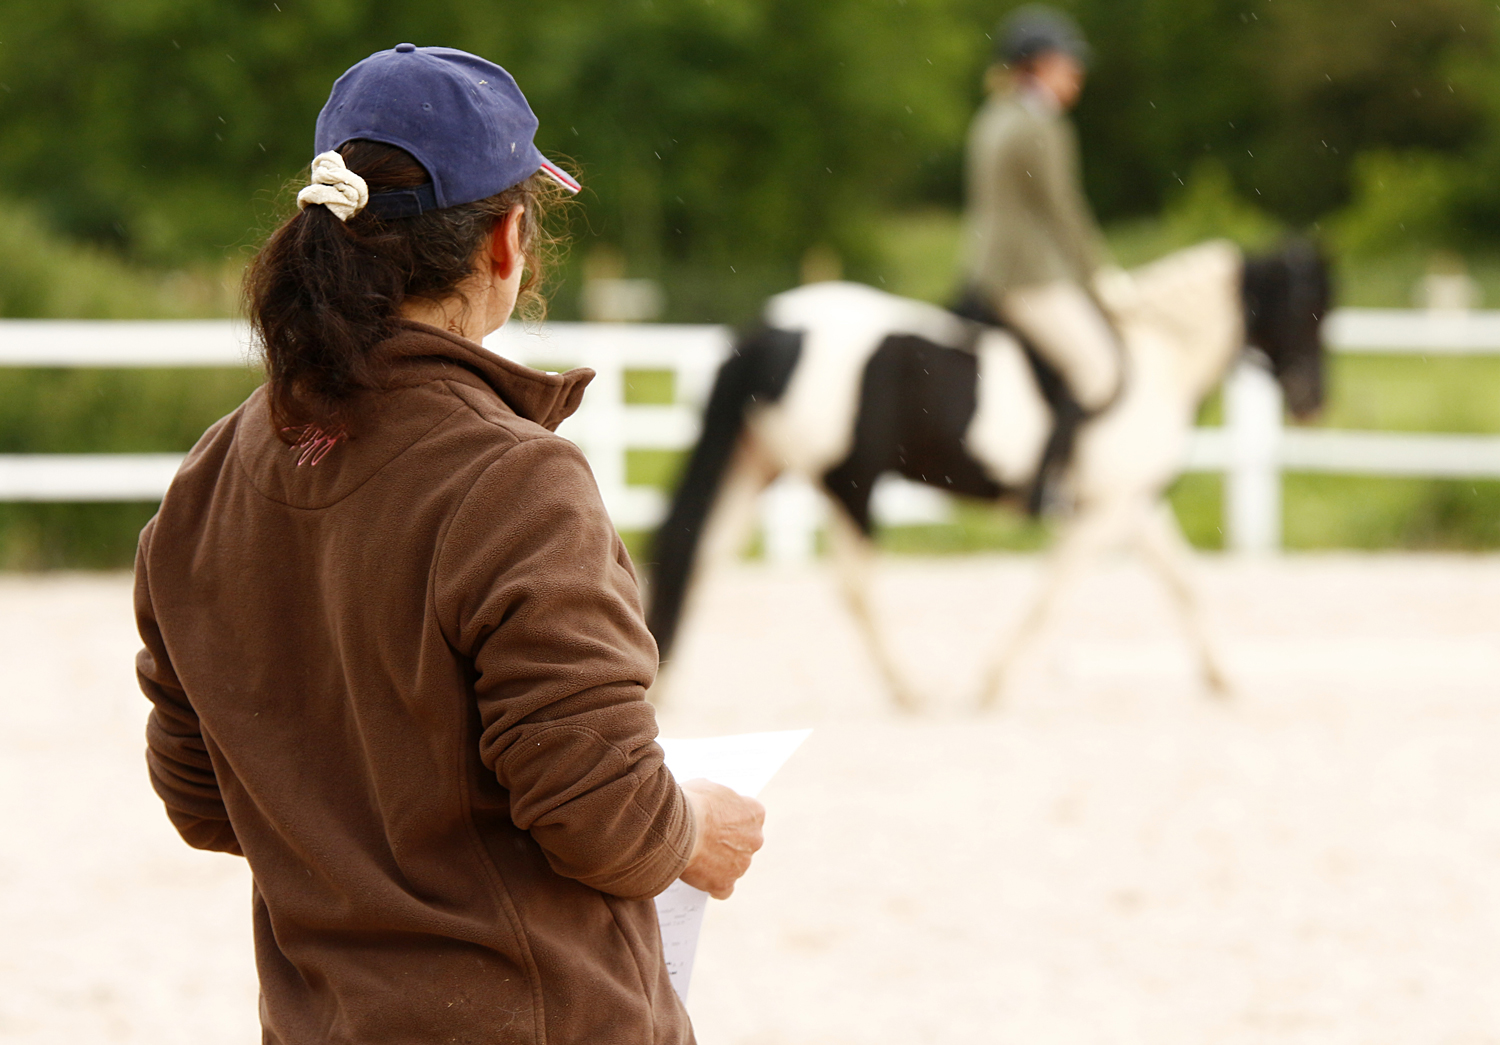 Why we should thank our trainers more often